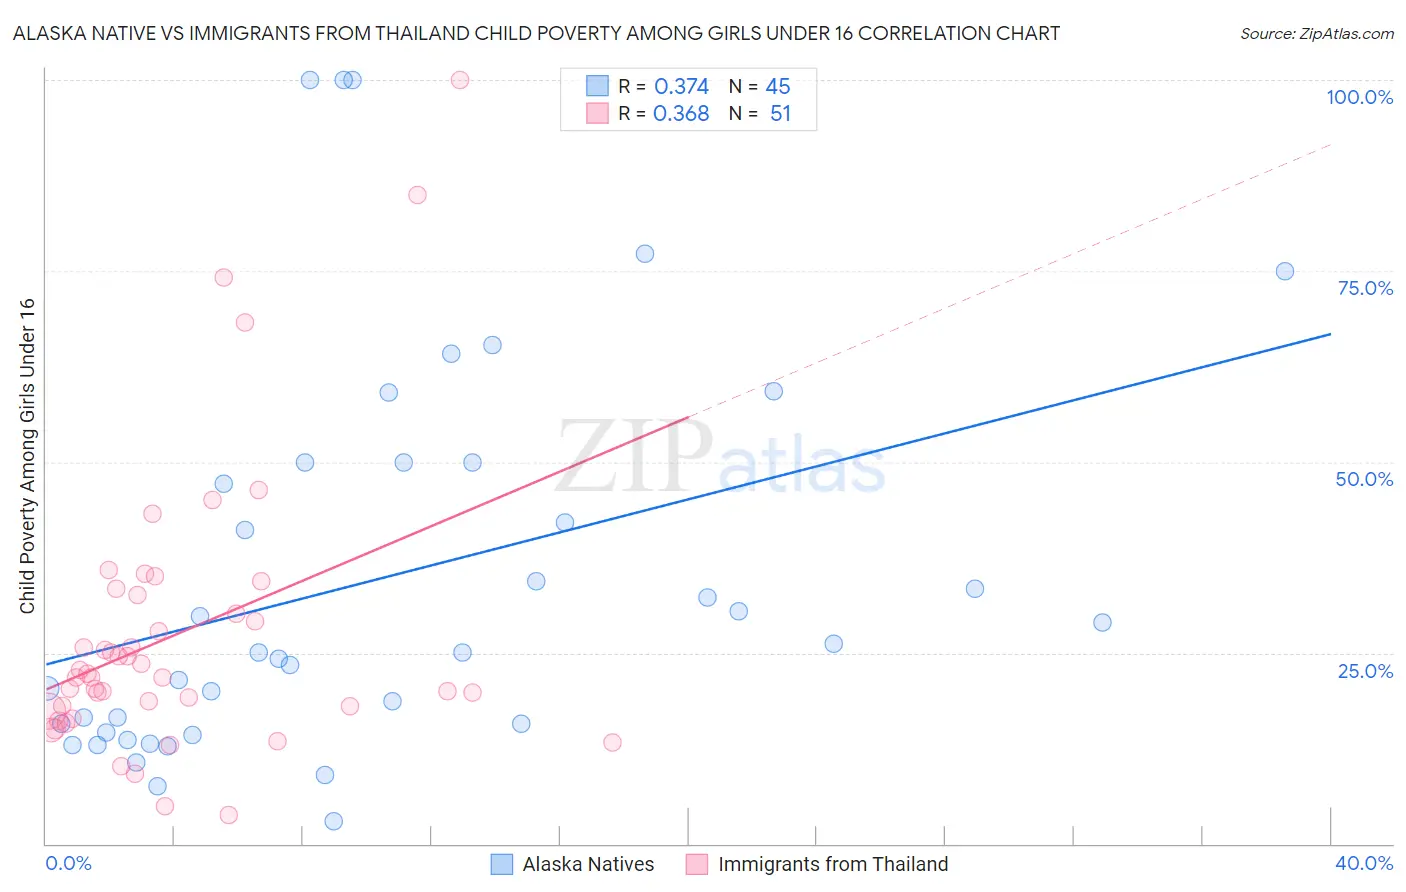 Alaska Native vs Immigrants from Thailand Child Poverty Among Girls Under 16